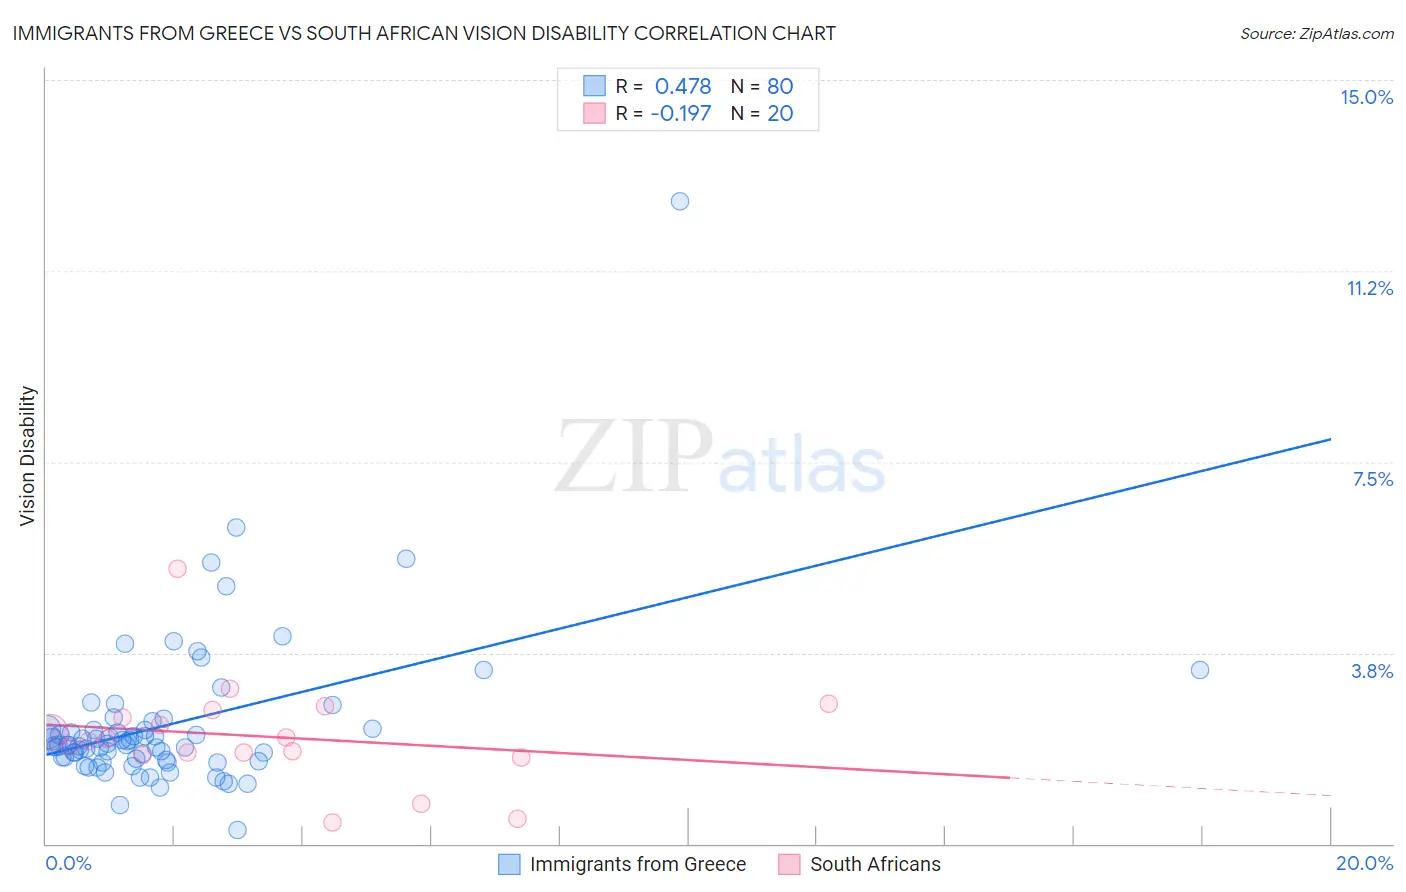 Immigrants from Greece vs South African Vision Disability